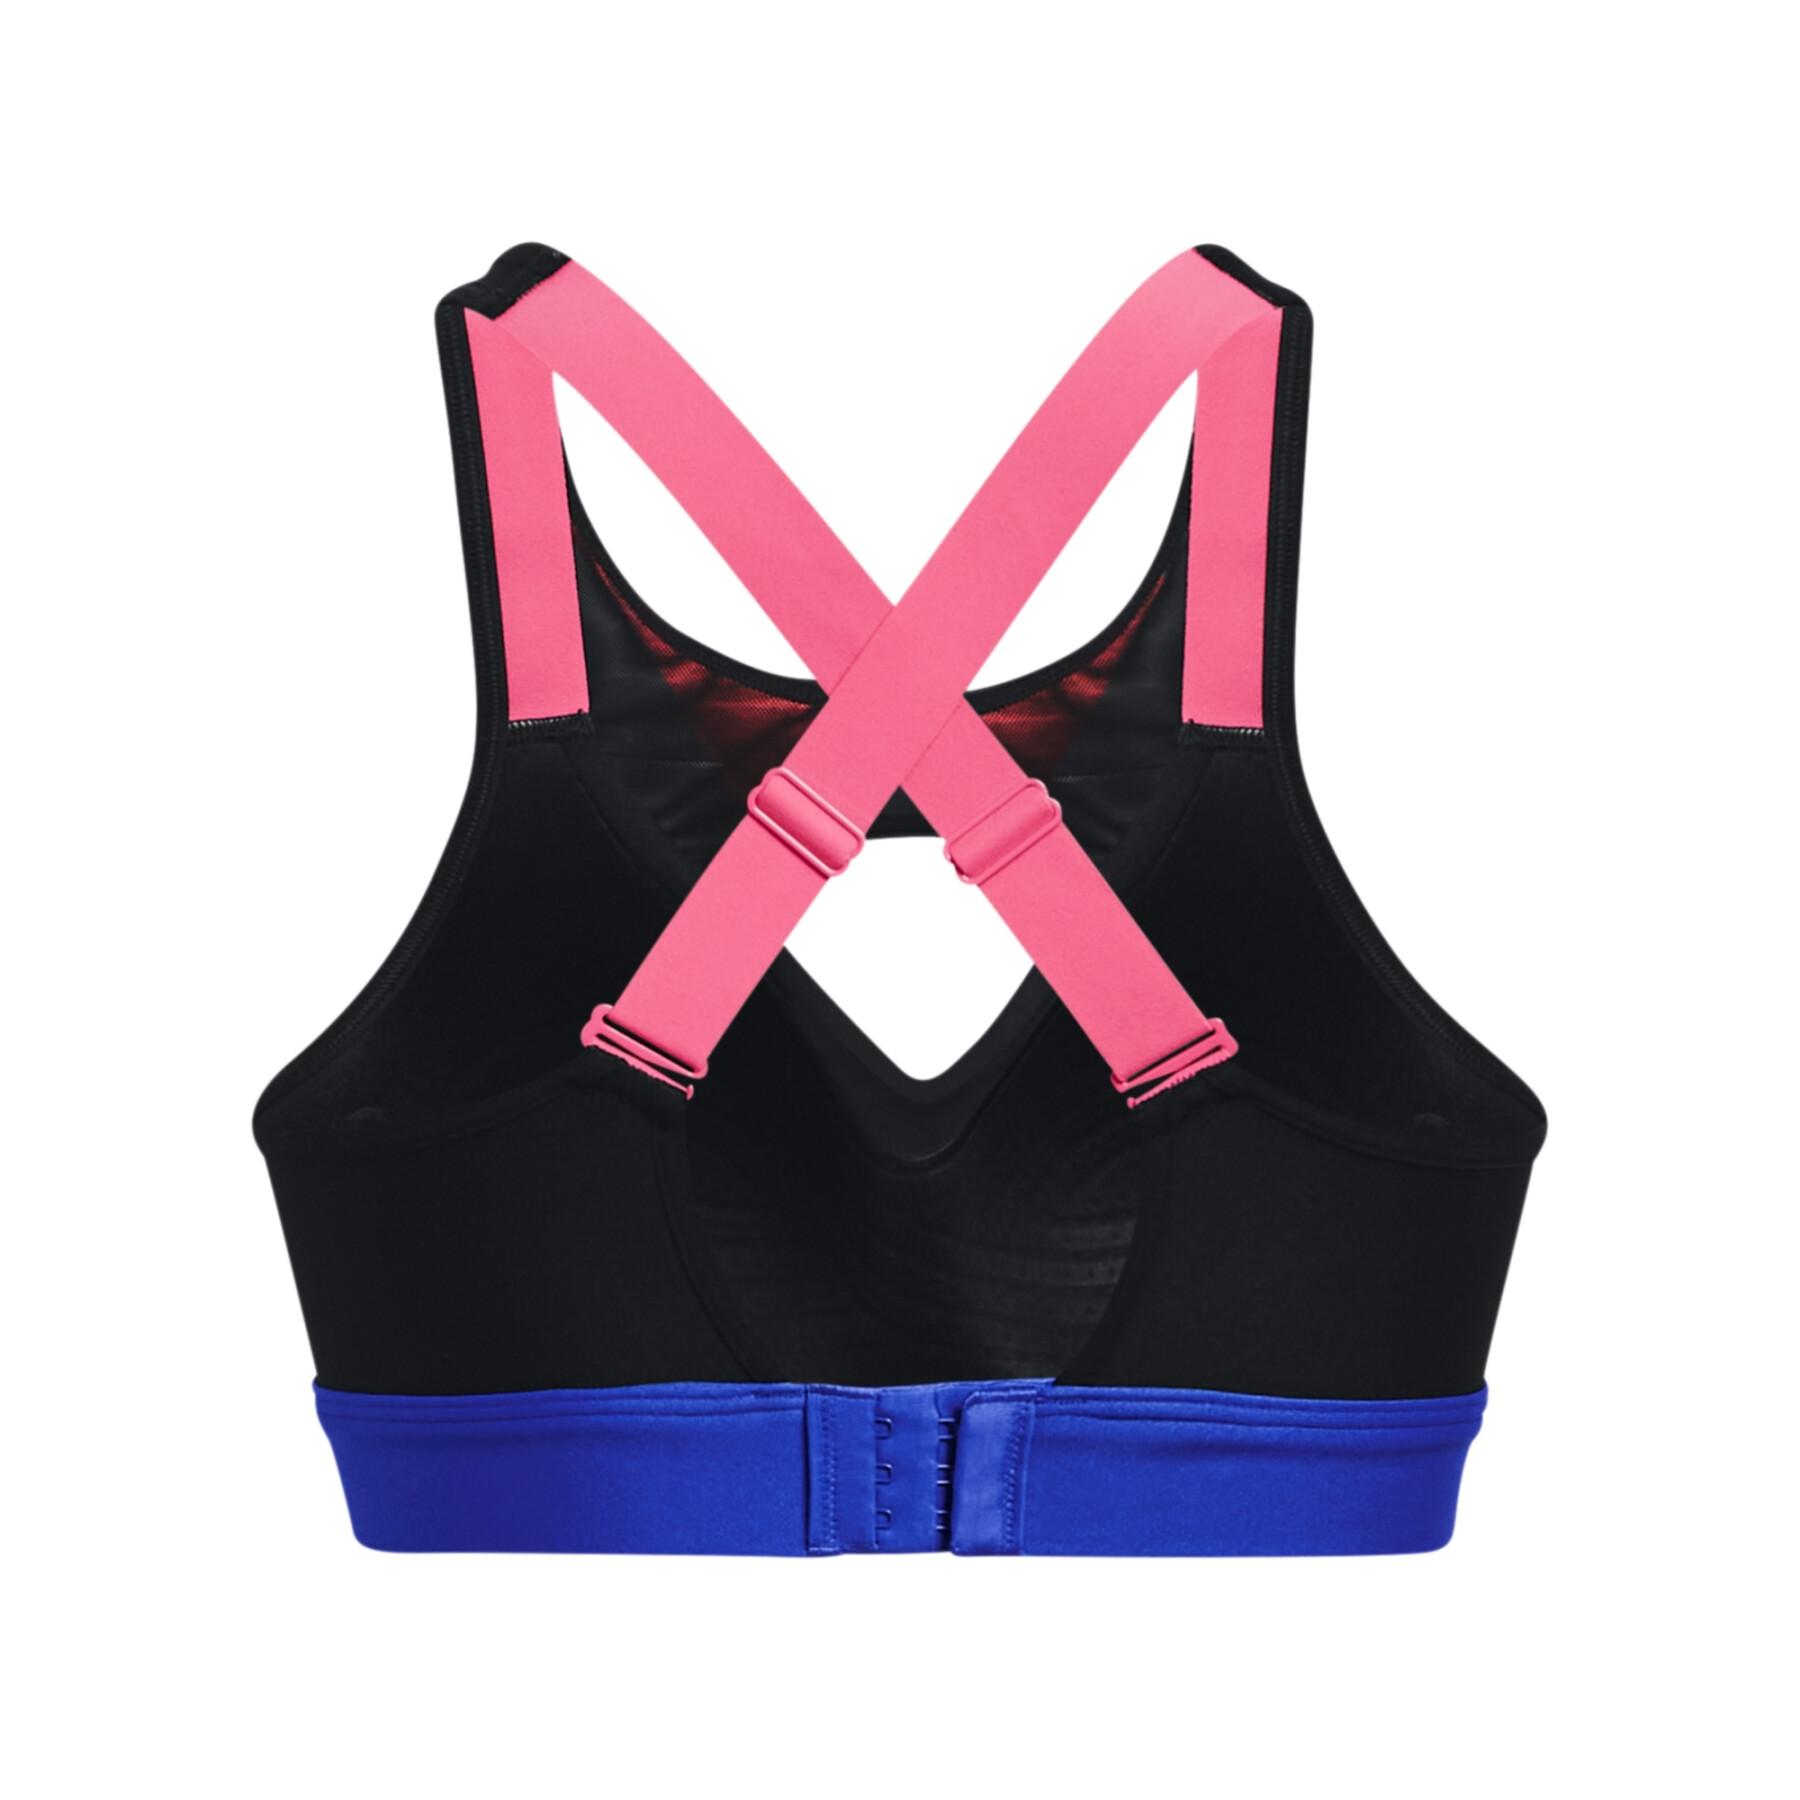 Brassière femme Under Armour Infinity High Harness